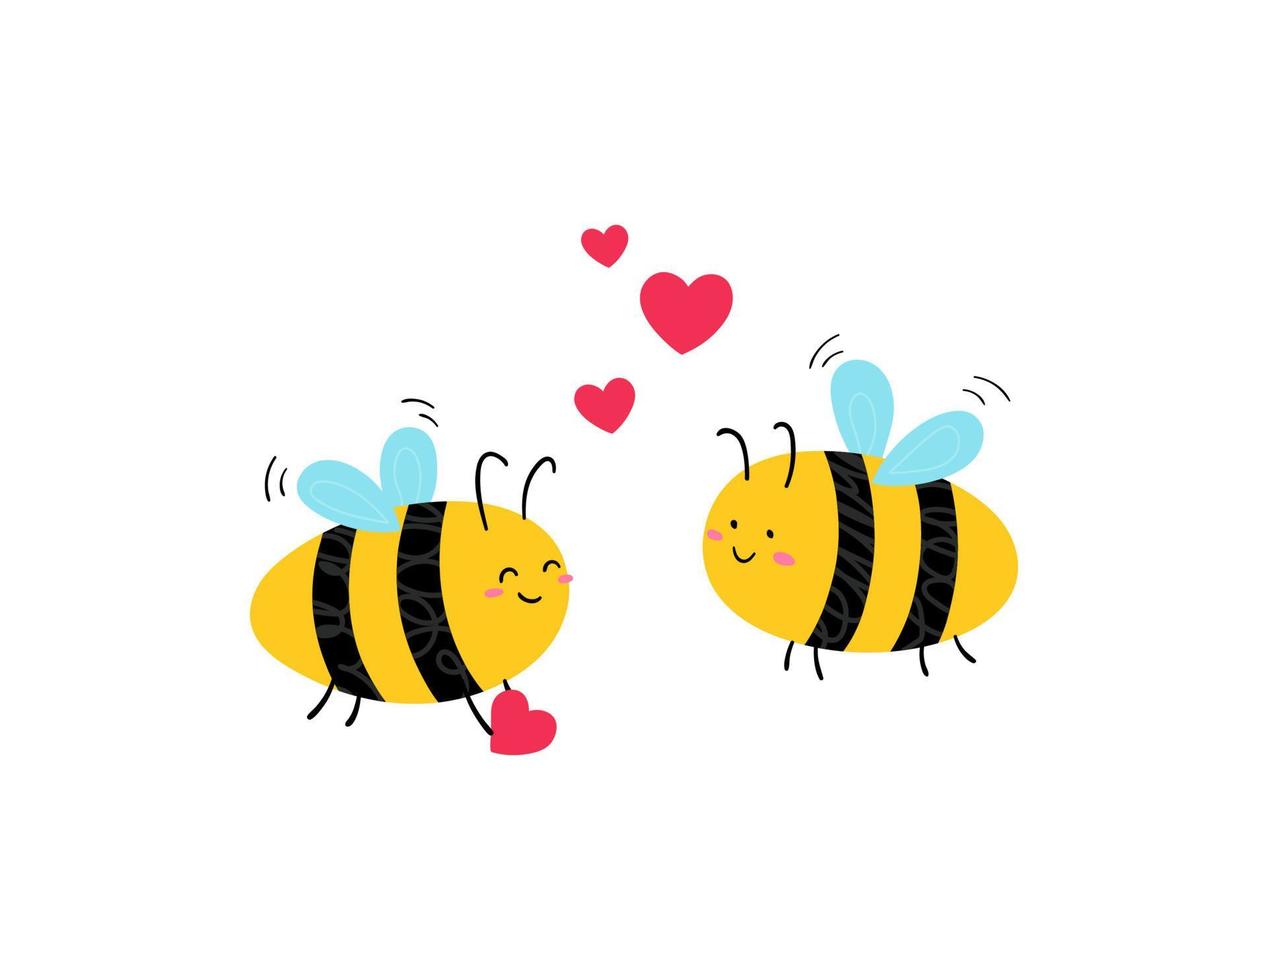 Funny hand drawn cute bees with hearts. Valentine's day concept. Great for mugs, greeting cards and t-shirts. Vector illustration.